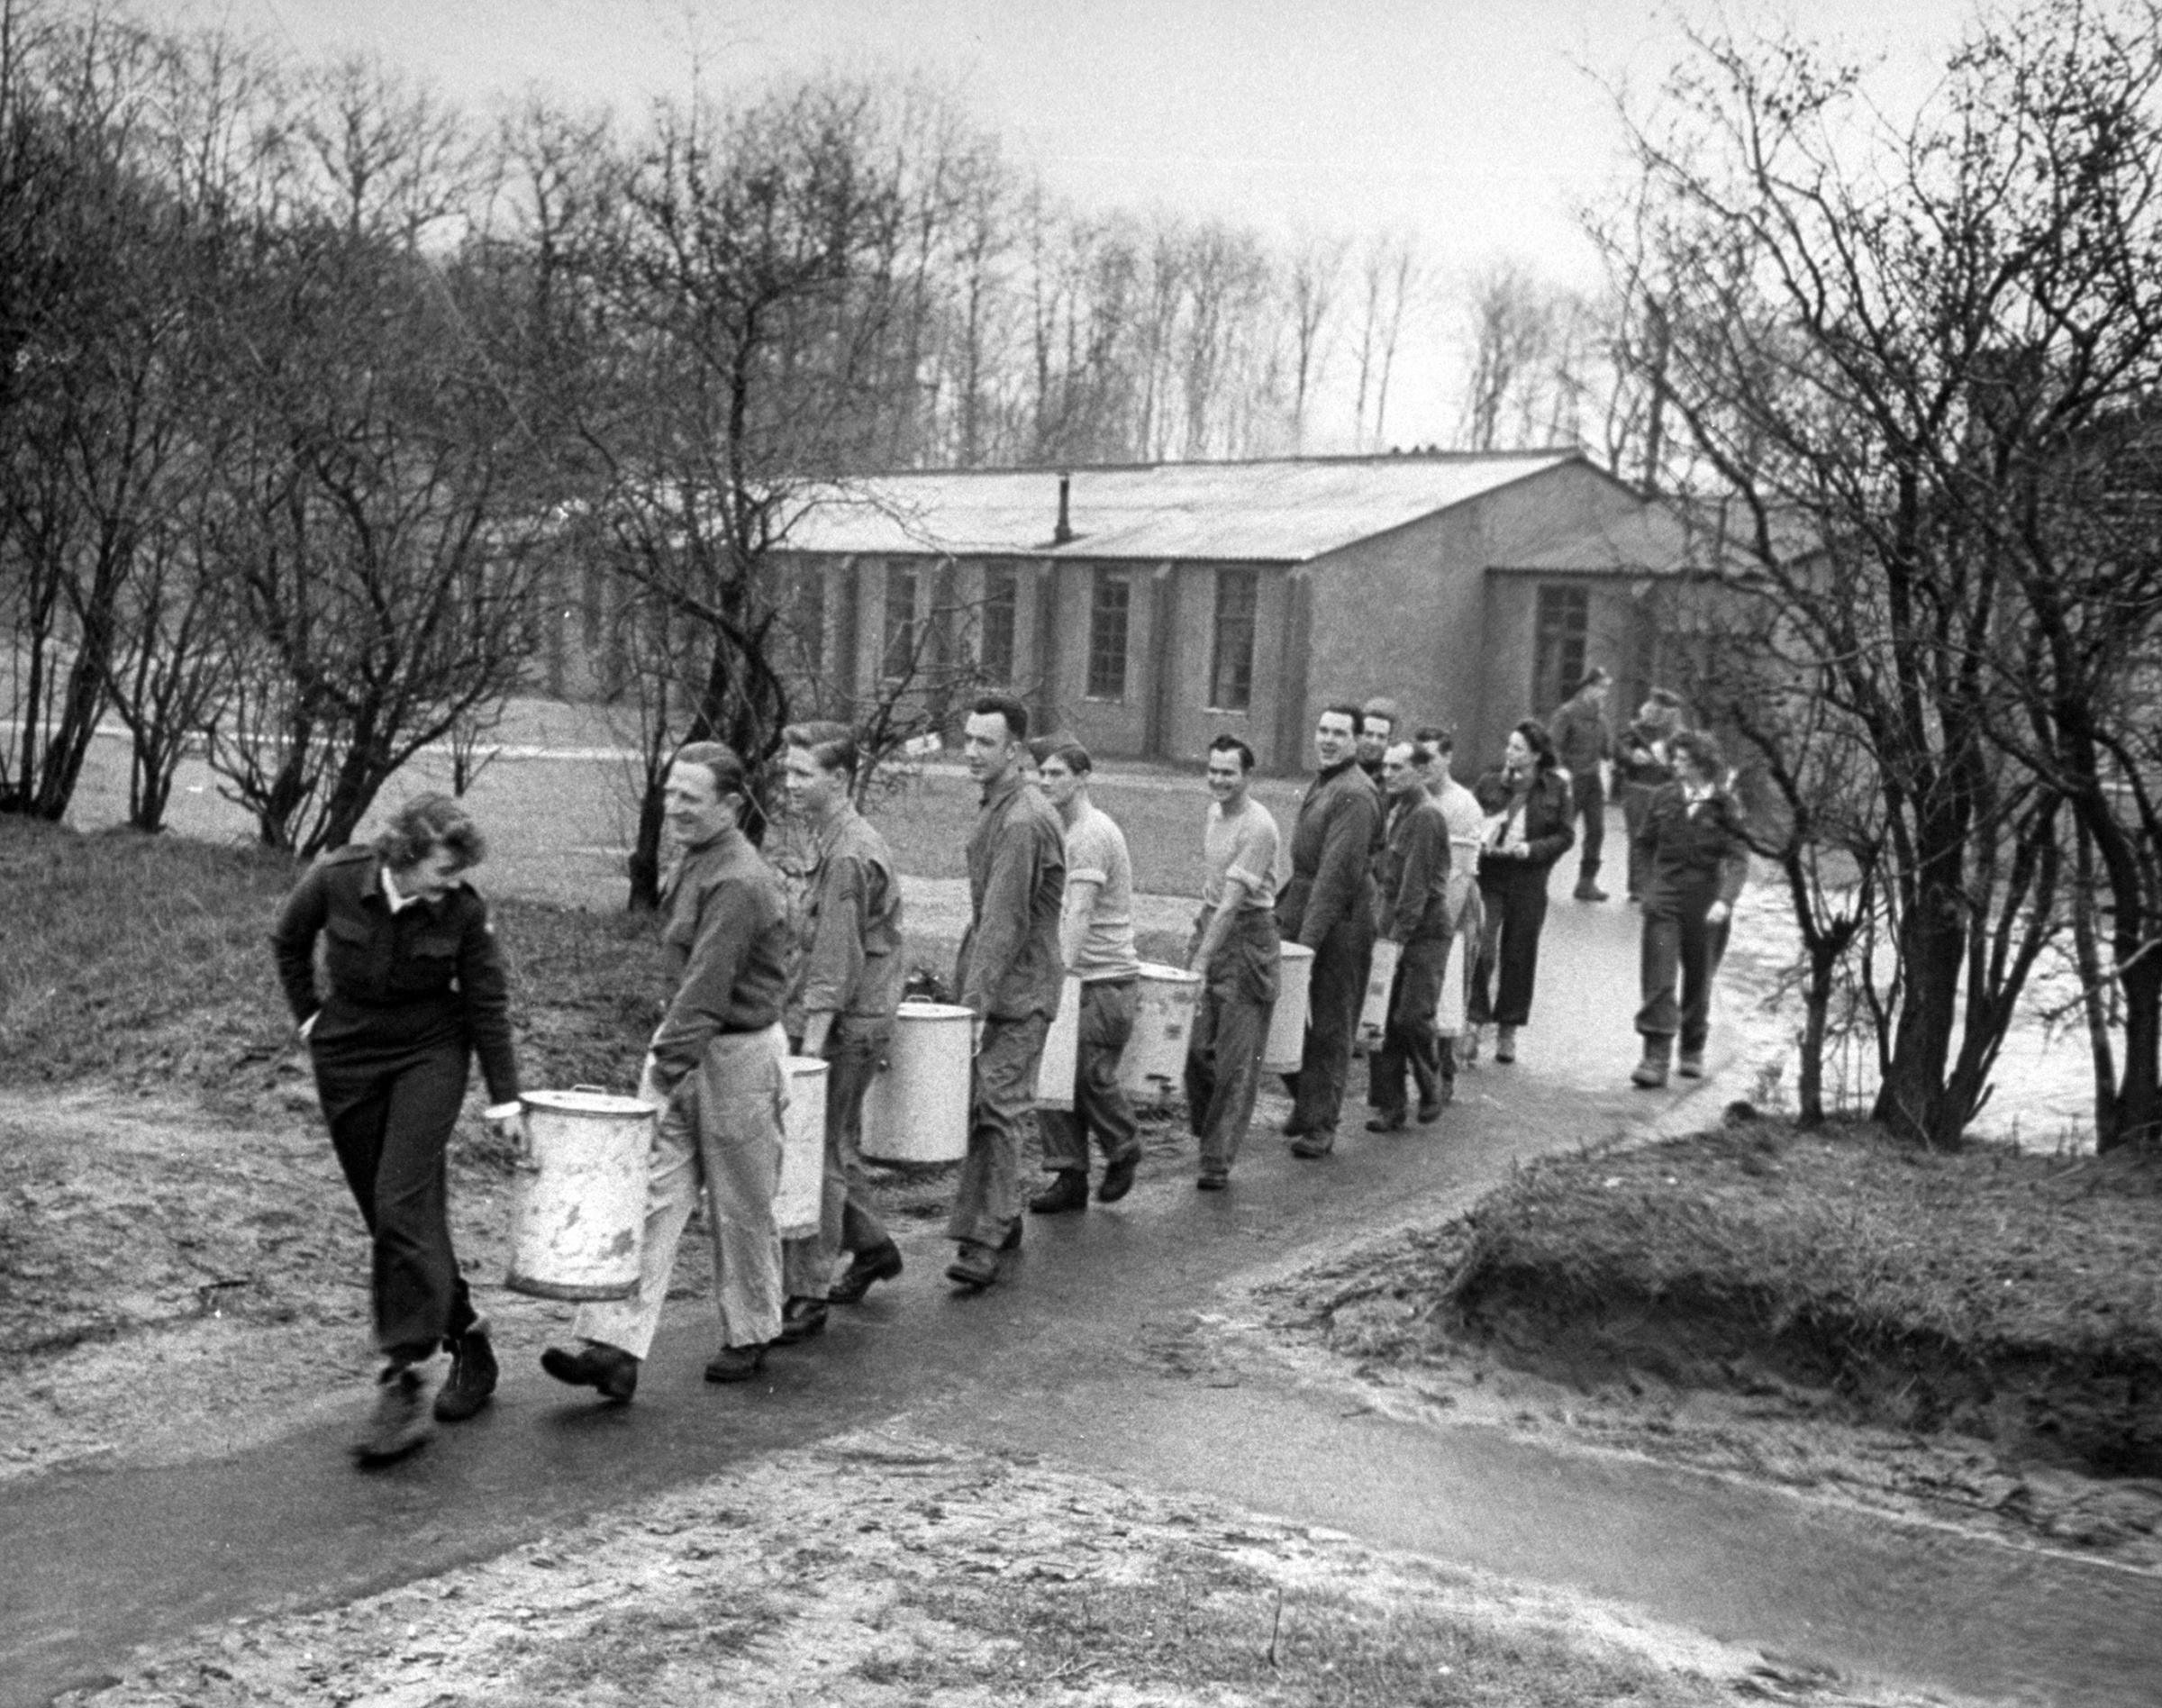 Coffee chain gang trails from mess hall to club mobile. Brew for afternoon's rounds is made in kitchen of base girls are visiting. Eight urns hold 40 gal. of coffee.